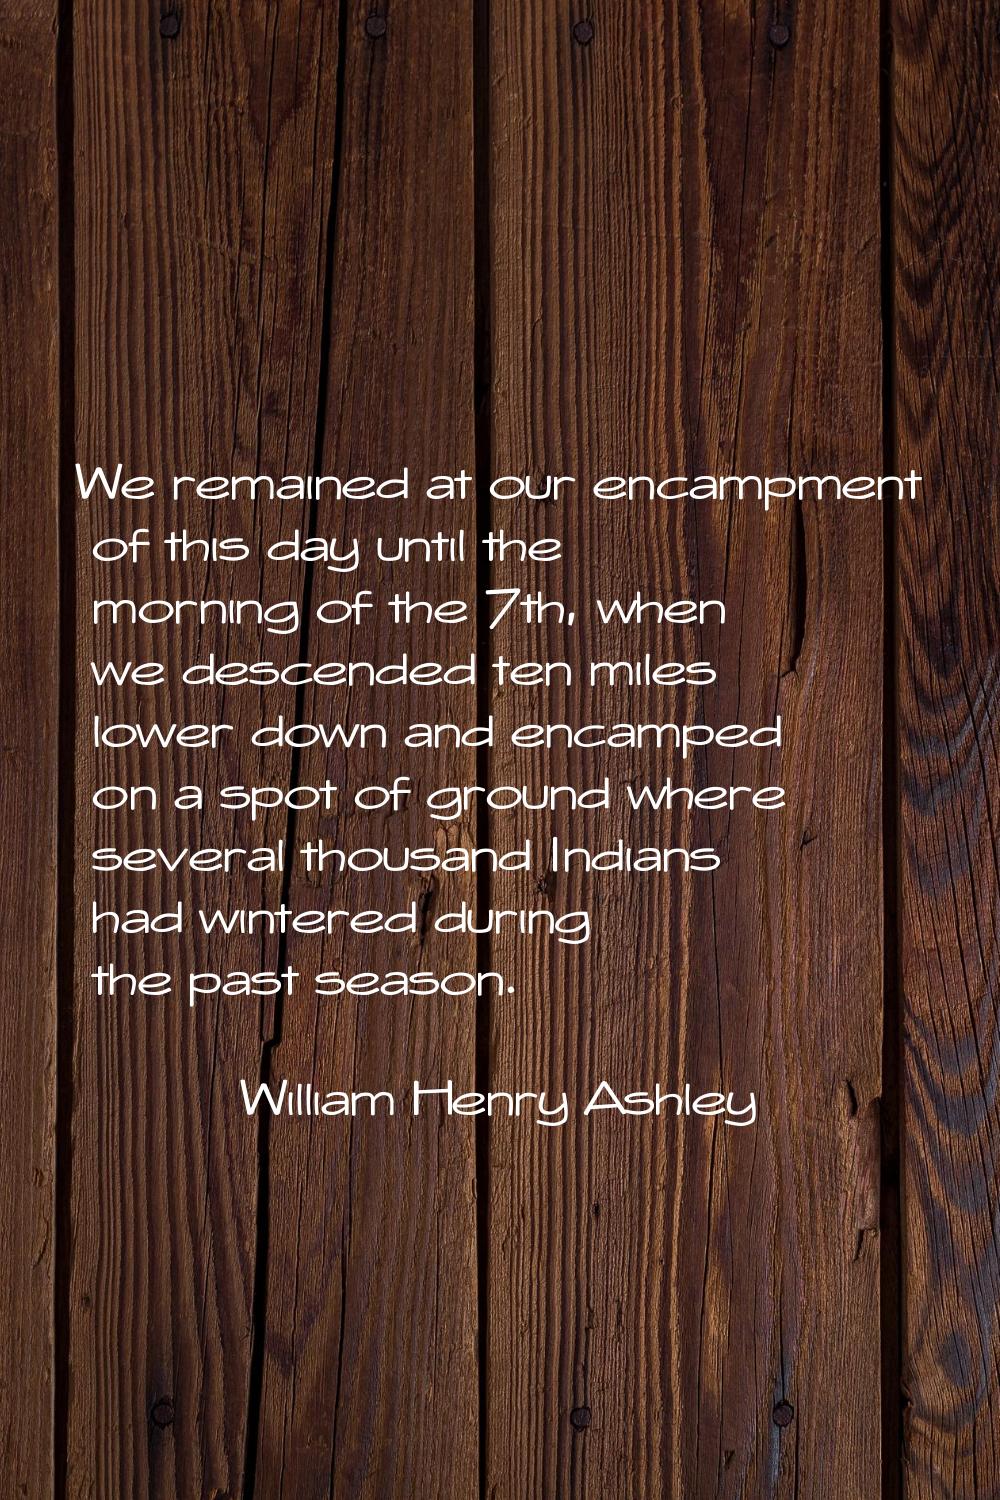 We remained at our encampment of this day until the morning of the 7th, when we descended ten miles